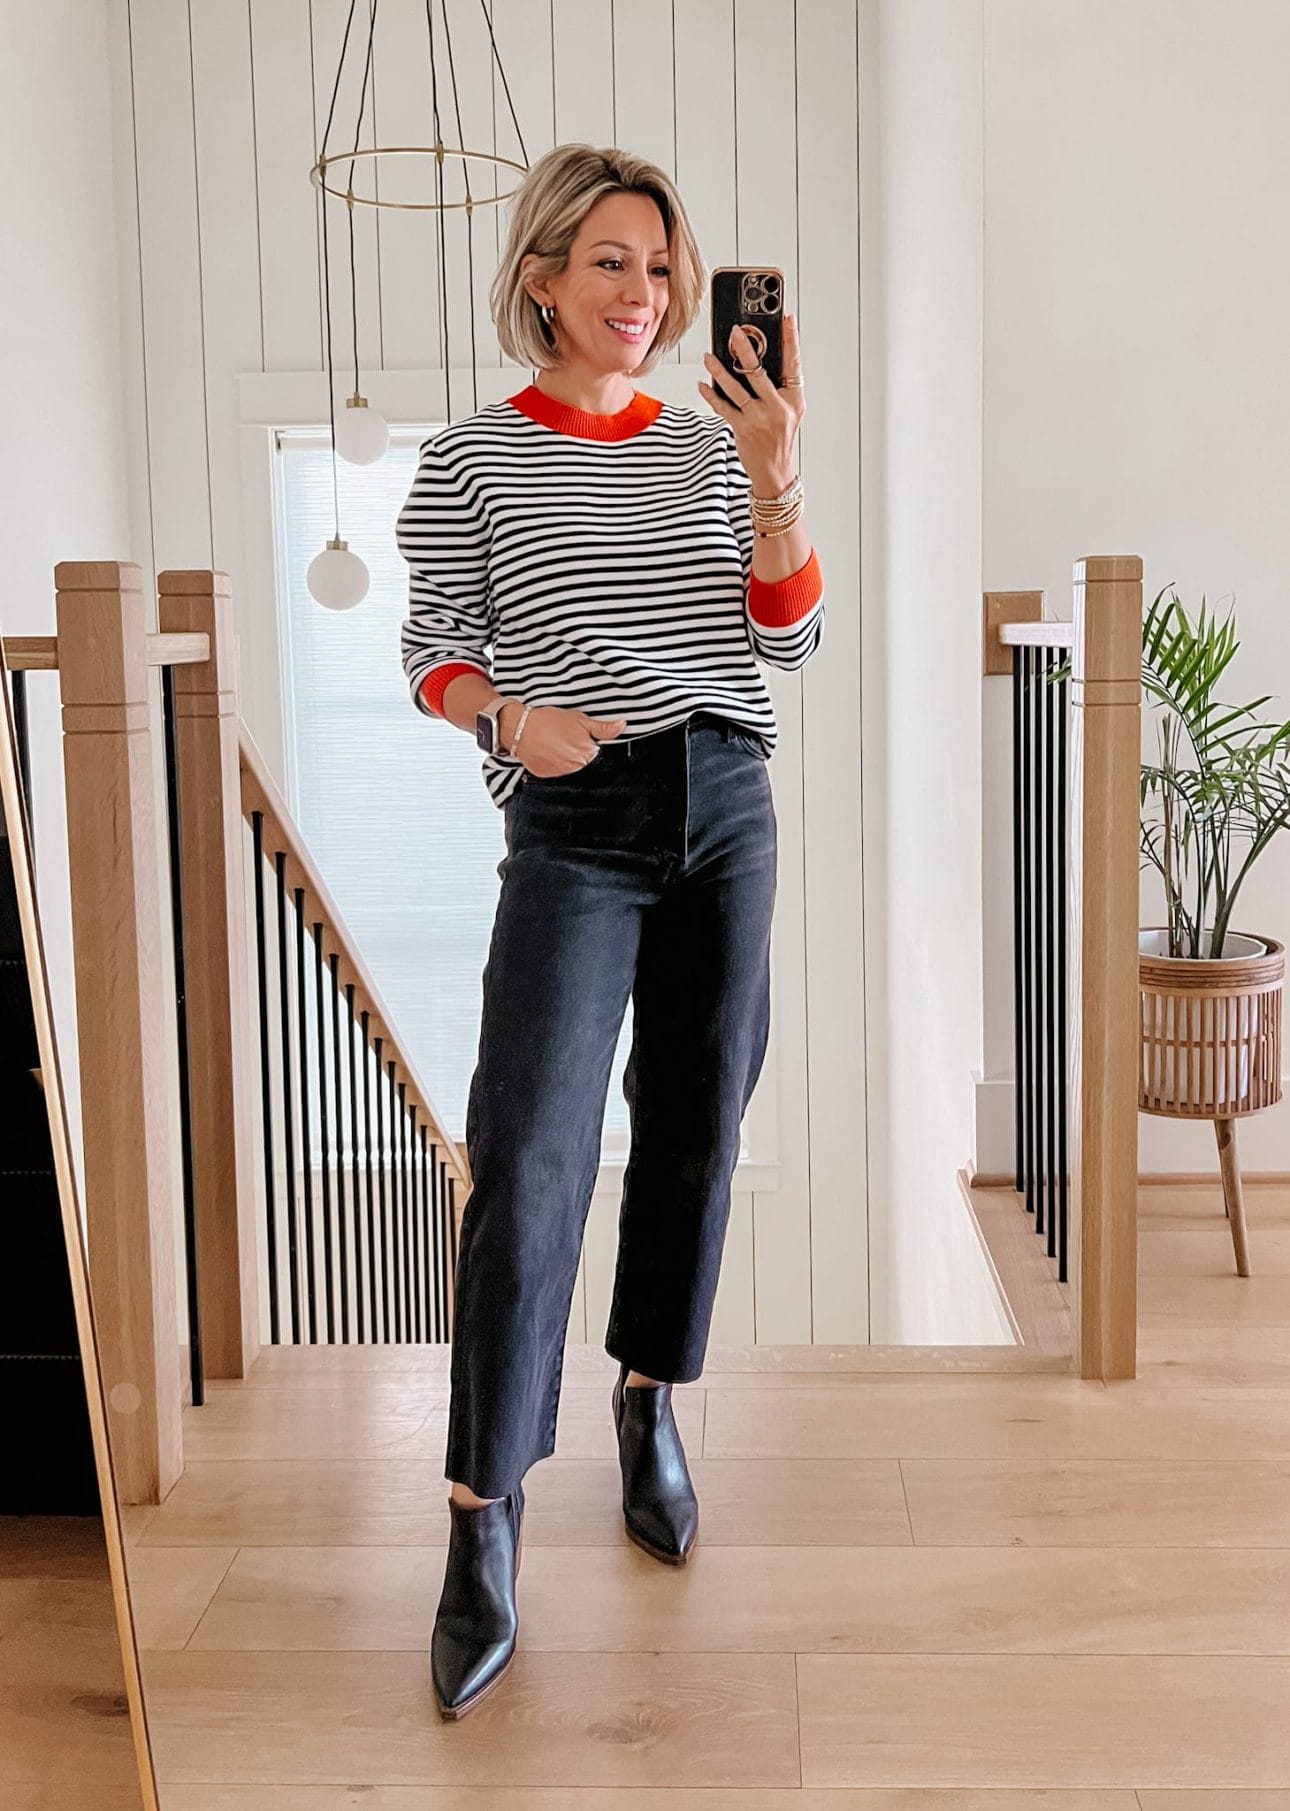 Orange Trim Black and White Striped Sweater, Jeans, Booties 